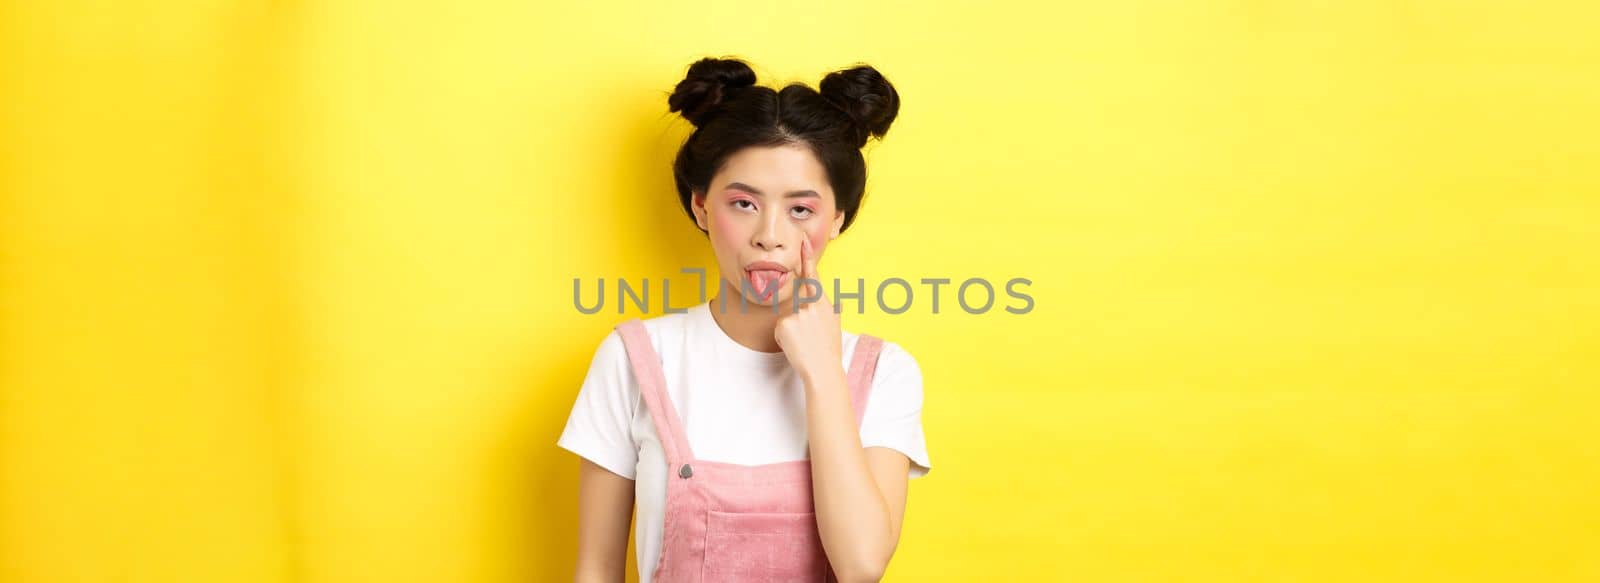 Rude asian girl stretch eyelid and showing tongue, mocking someone, standing on yellow background.